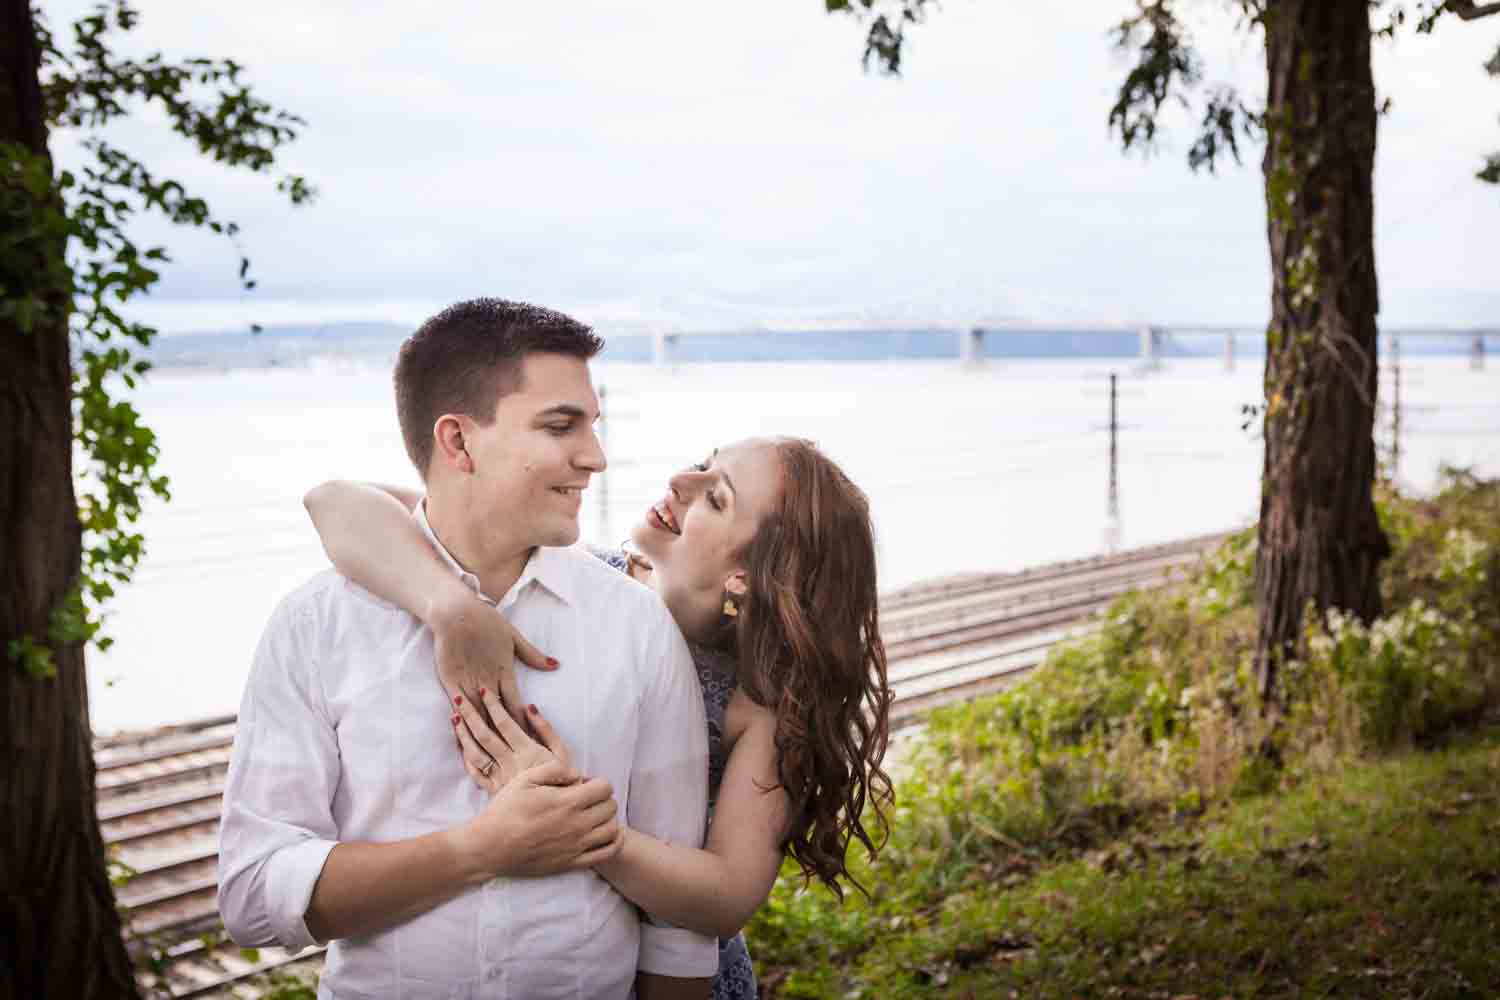 Woman hugging man from behind with Hudson River and railroad in background at a Lyndhurst Mansion engagement photoshoot